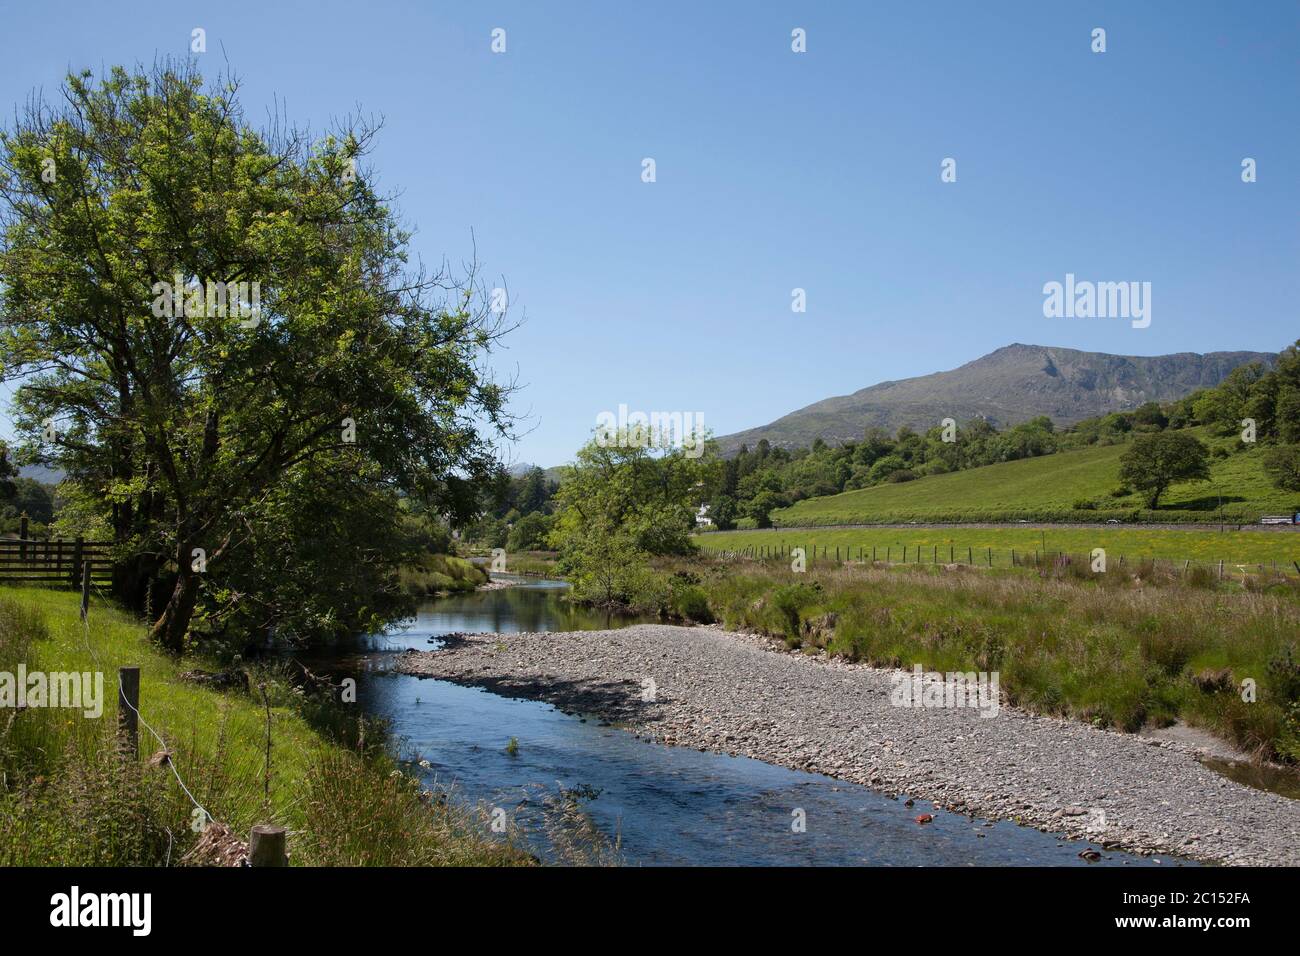 Moel Siabod above the Afon Lledr near the village of Dolwyddelan in the Lledr Valley between Blaenau Ffestiniog and Betws-y-Coed Snowdonia North Wales Stock Photo